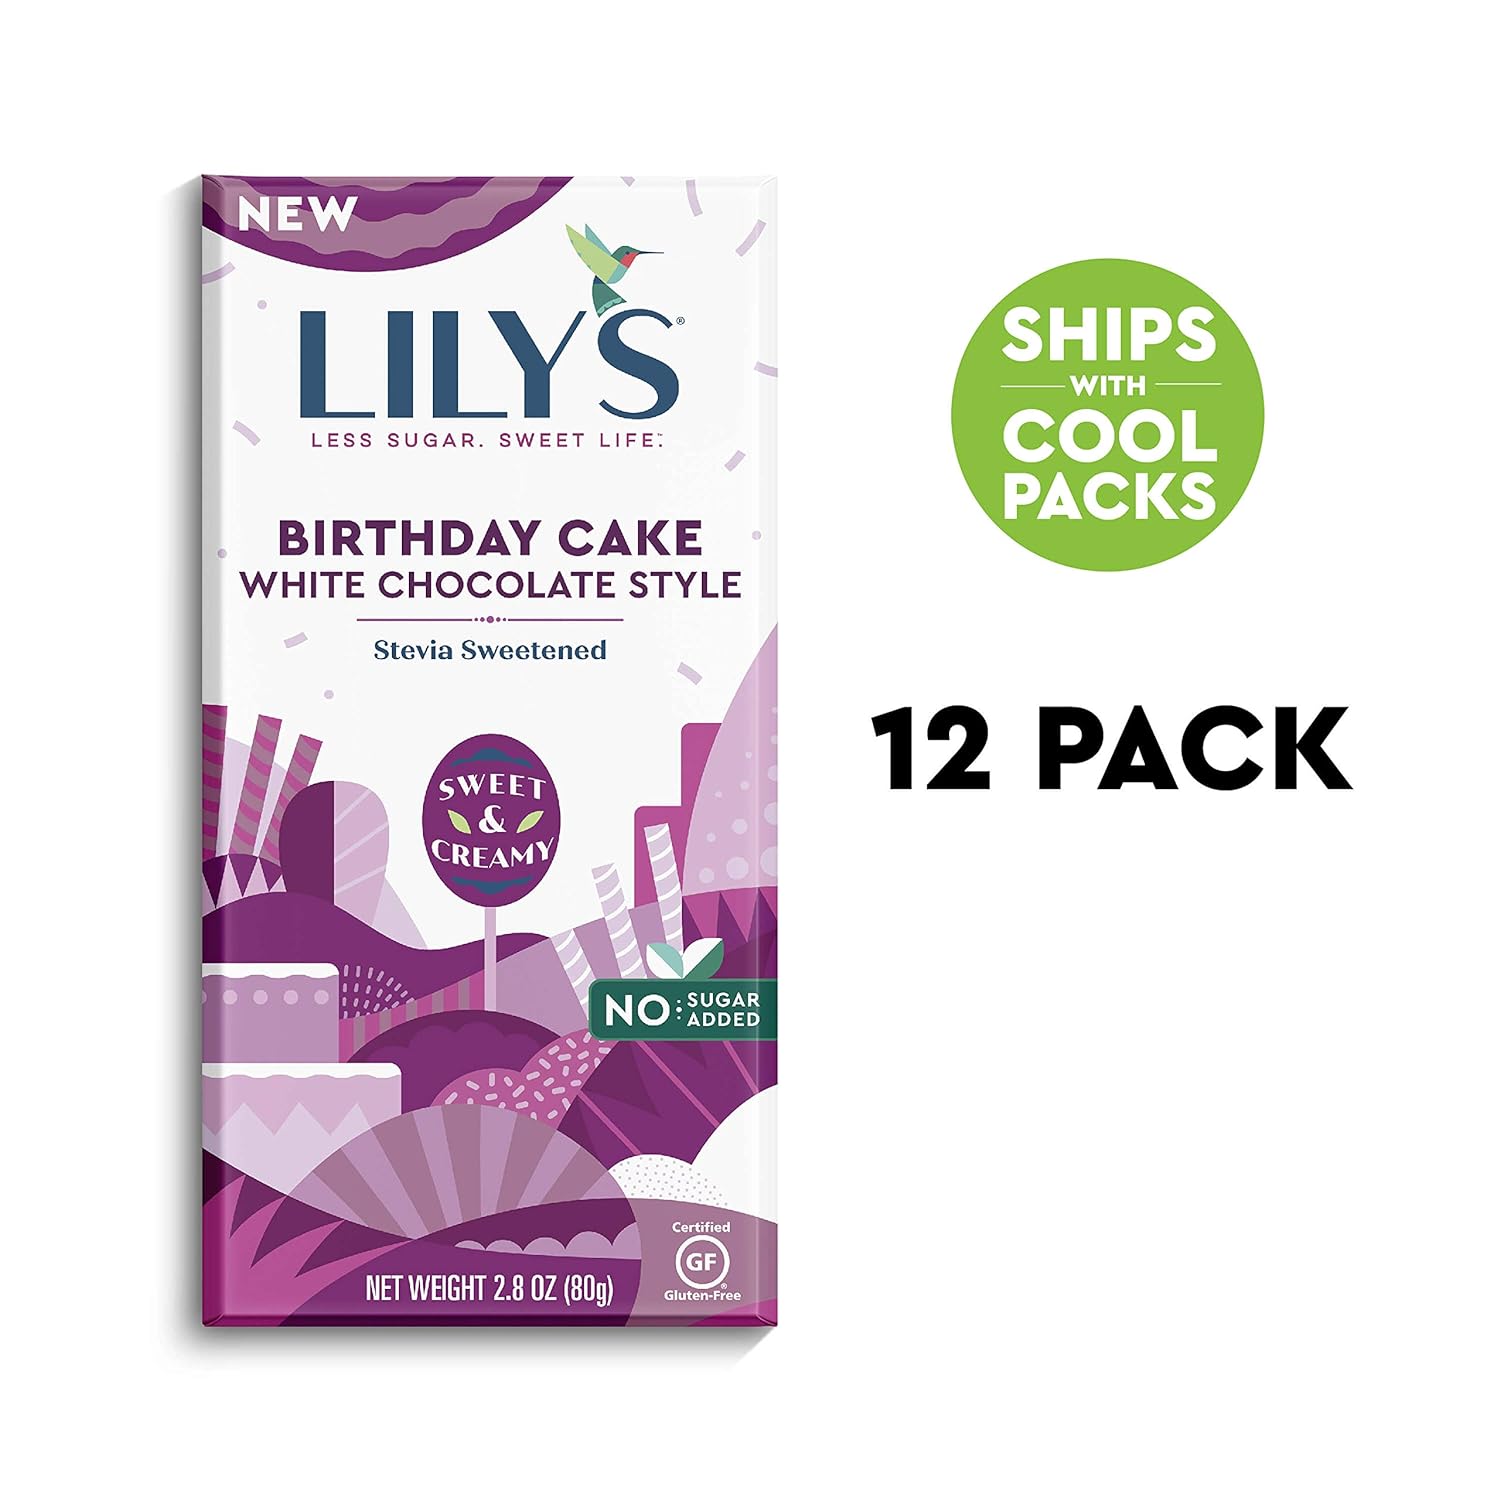  Birthday Cake White Chocolate Bar By Lilys Sweets | Stevia Sweetened, No Added Sugar, Low-Carb, Keto Friendly | Fair Trade, Gluten-Free & Non-Gmo | 2.8 Ounce, 12 Pack